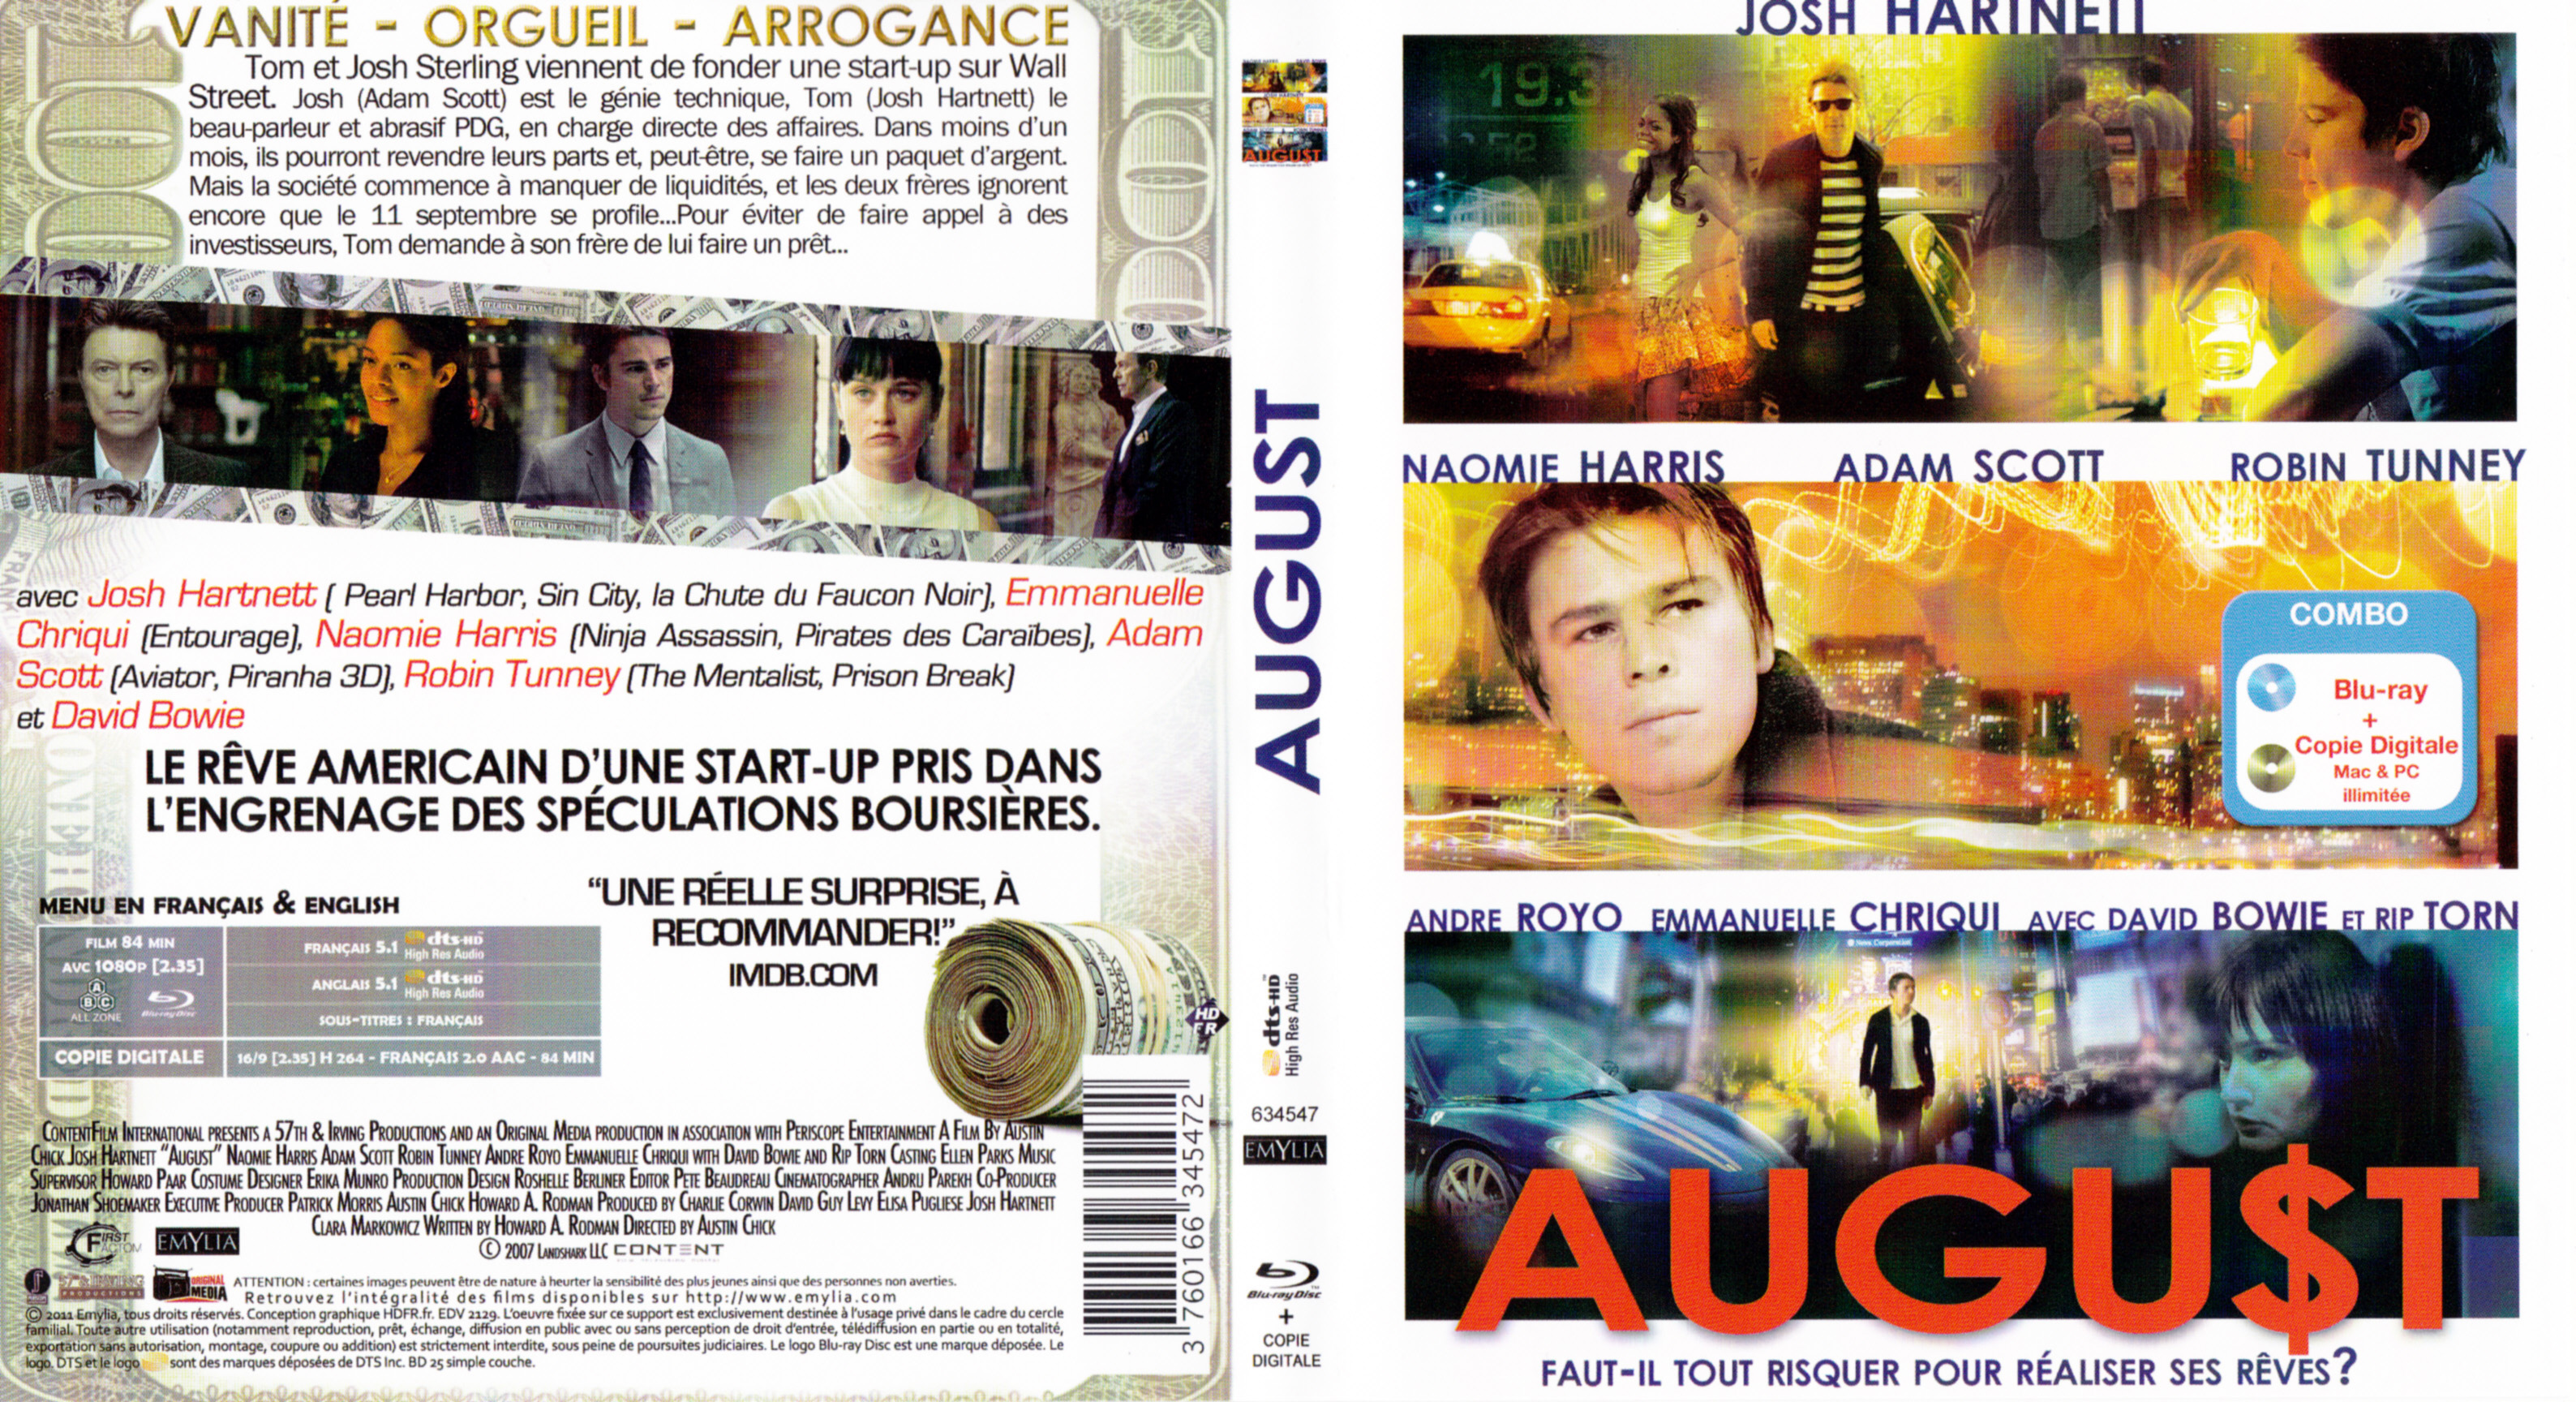 Jaquette DVD August (BLU-RAY)